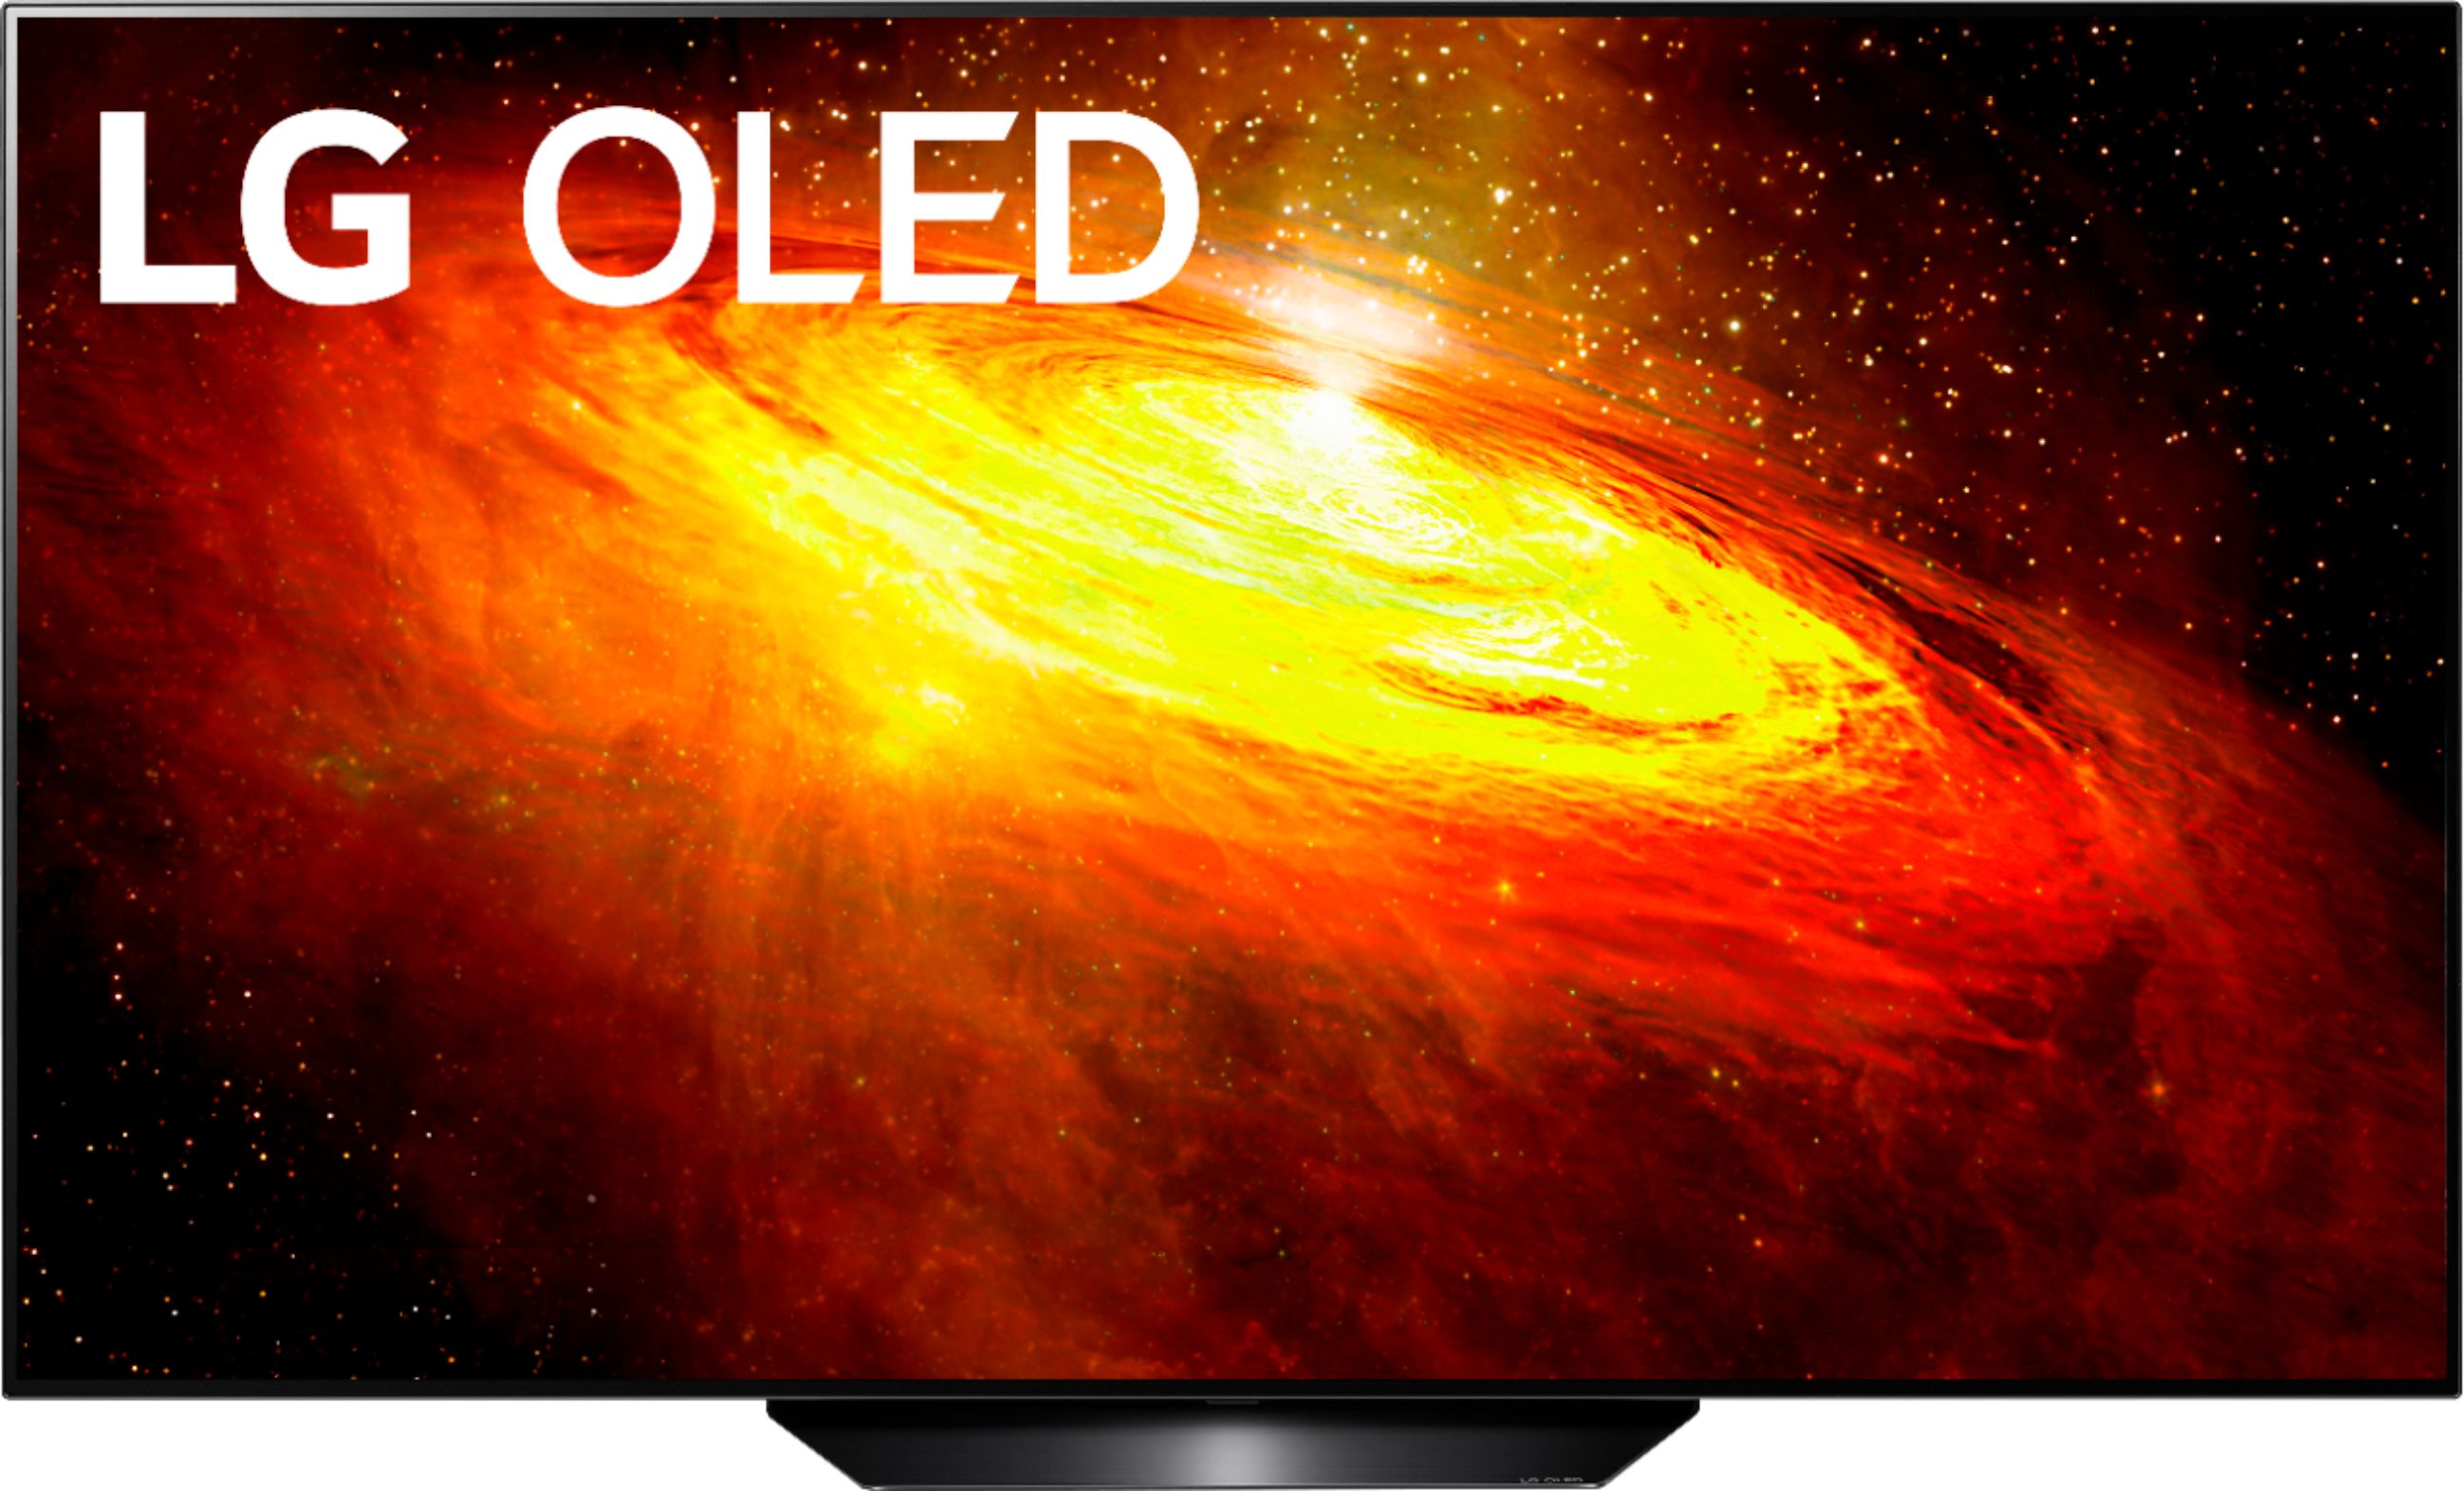 LG makes some great TVs, and you can't beat $300 off one of them! This 55-inch TV is also a 4k Smart TV with an OLED display. It's up to you what brand you choose!